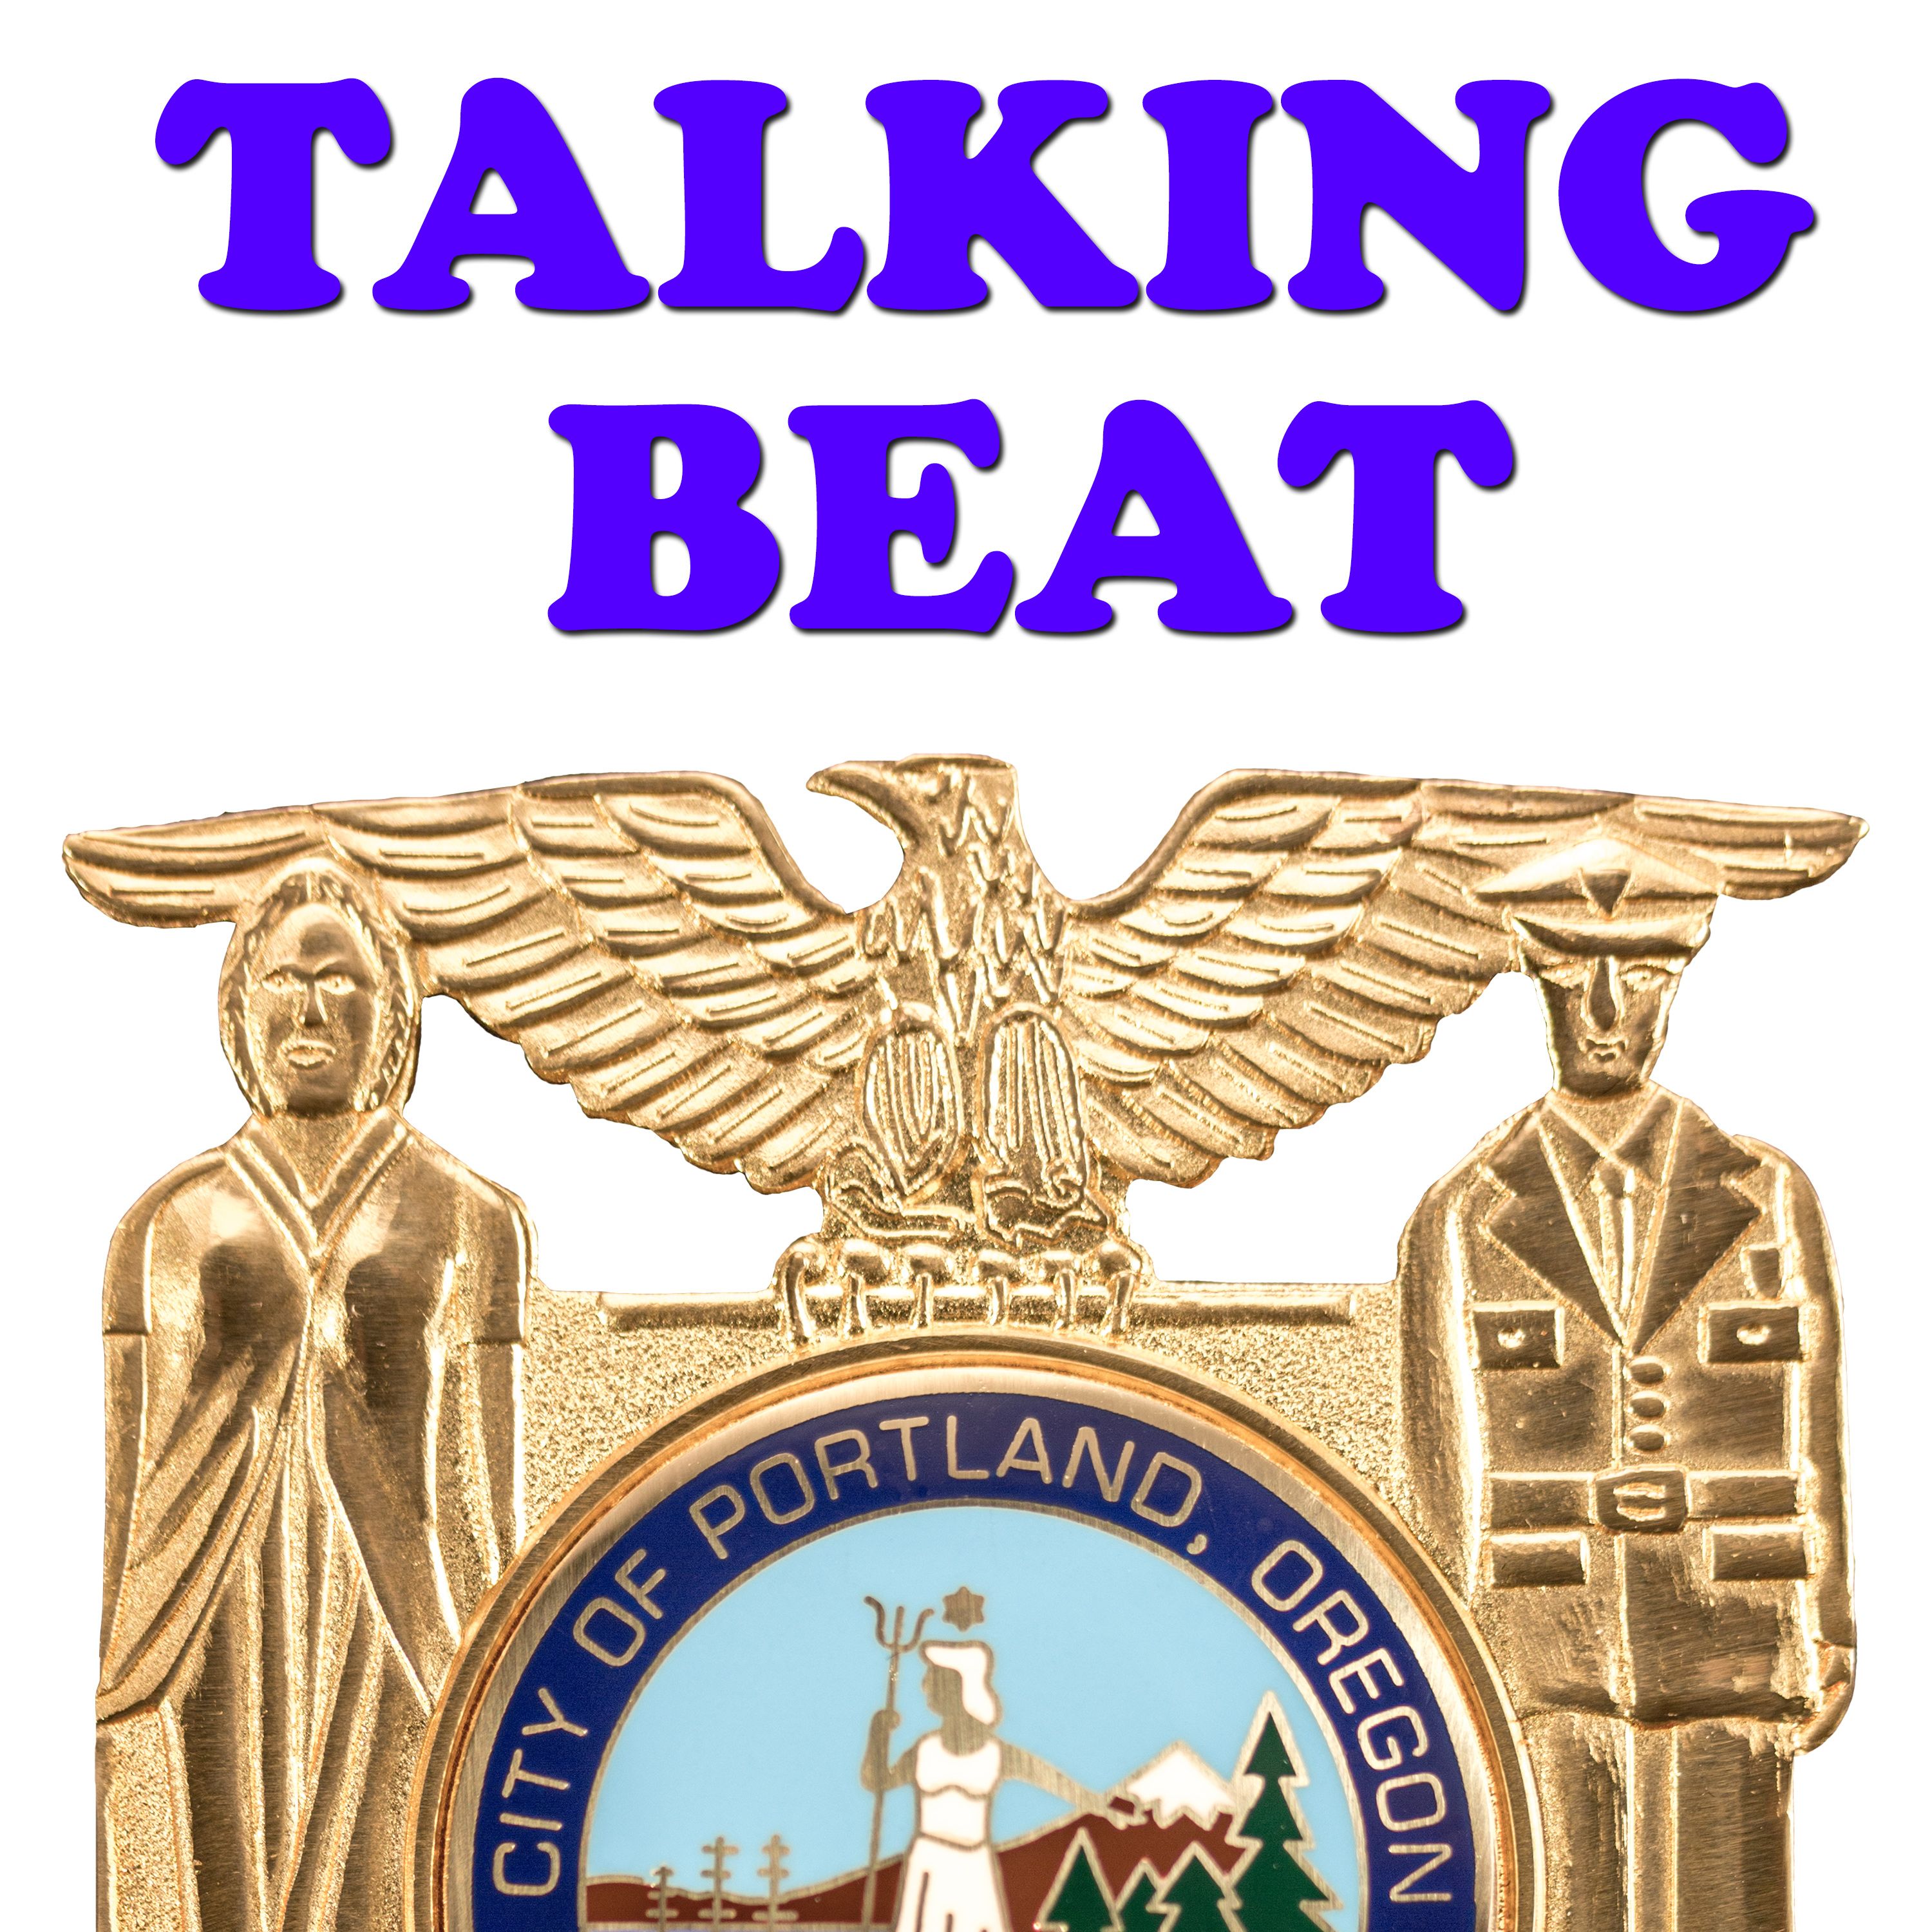 Talking Beat - a Conversation with Chief Bob Day